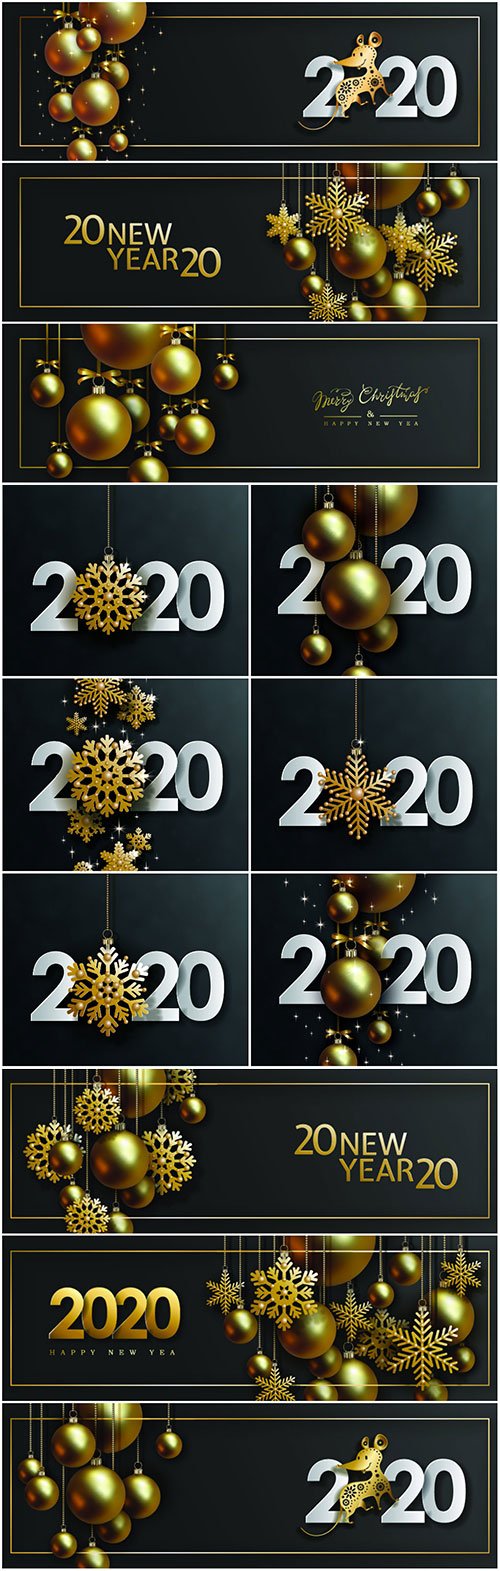 2020 Christmas and New Year design with hanging realistic golden balls